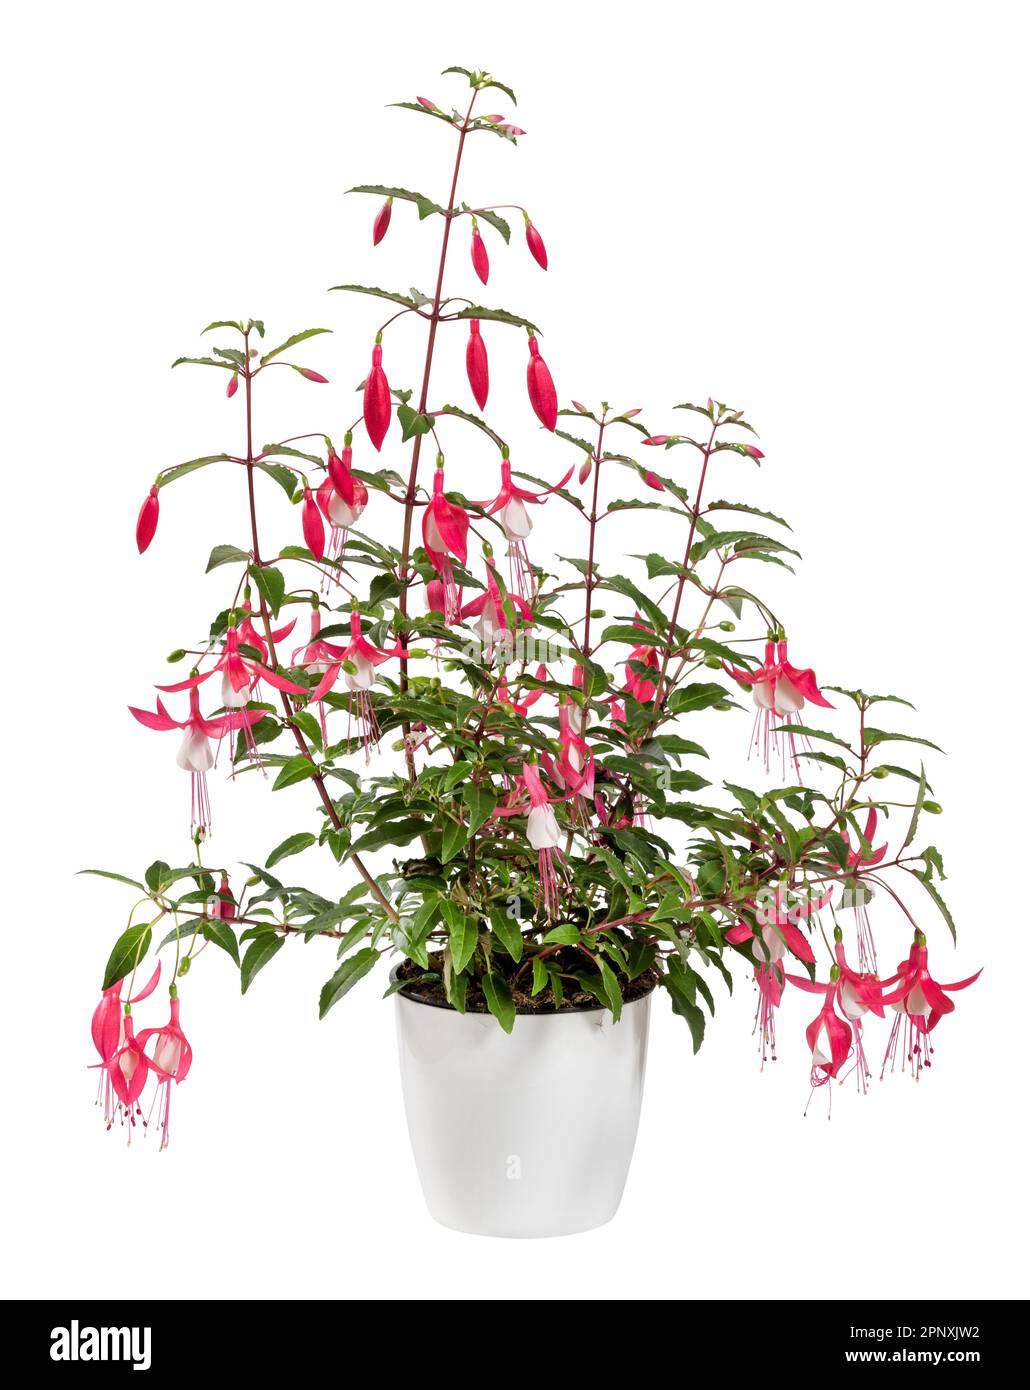 Fresh green leaves of Fuchsia plant with pink flowers growing in ceramic pot isolated on white background Stock Photo